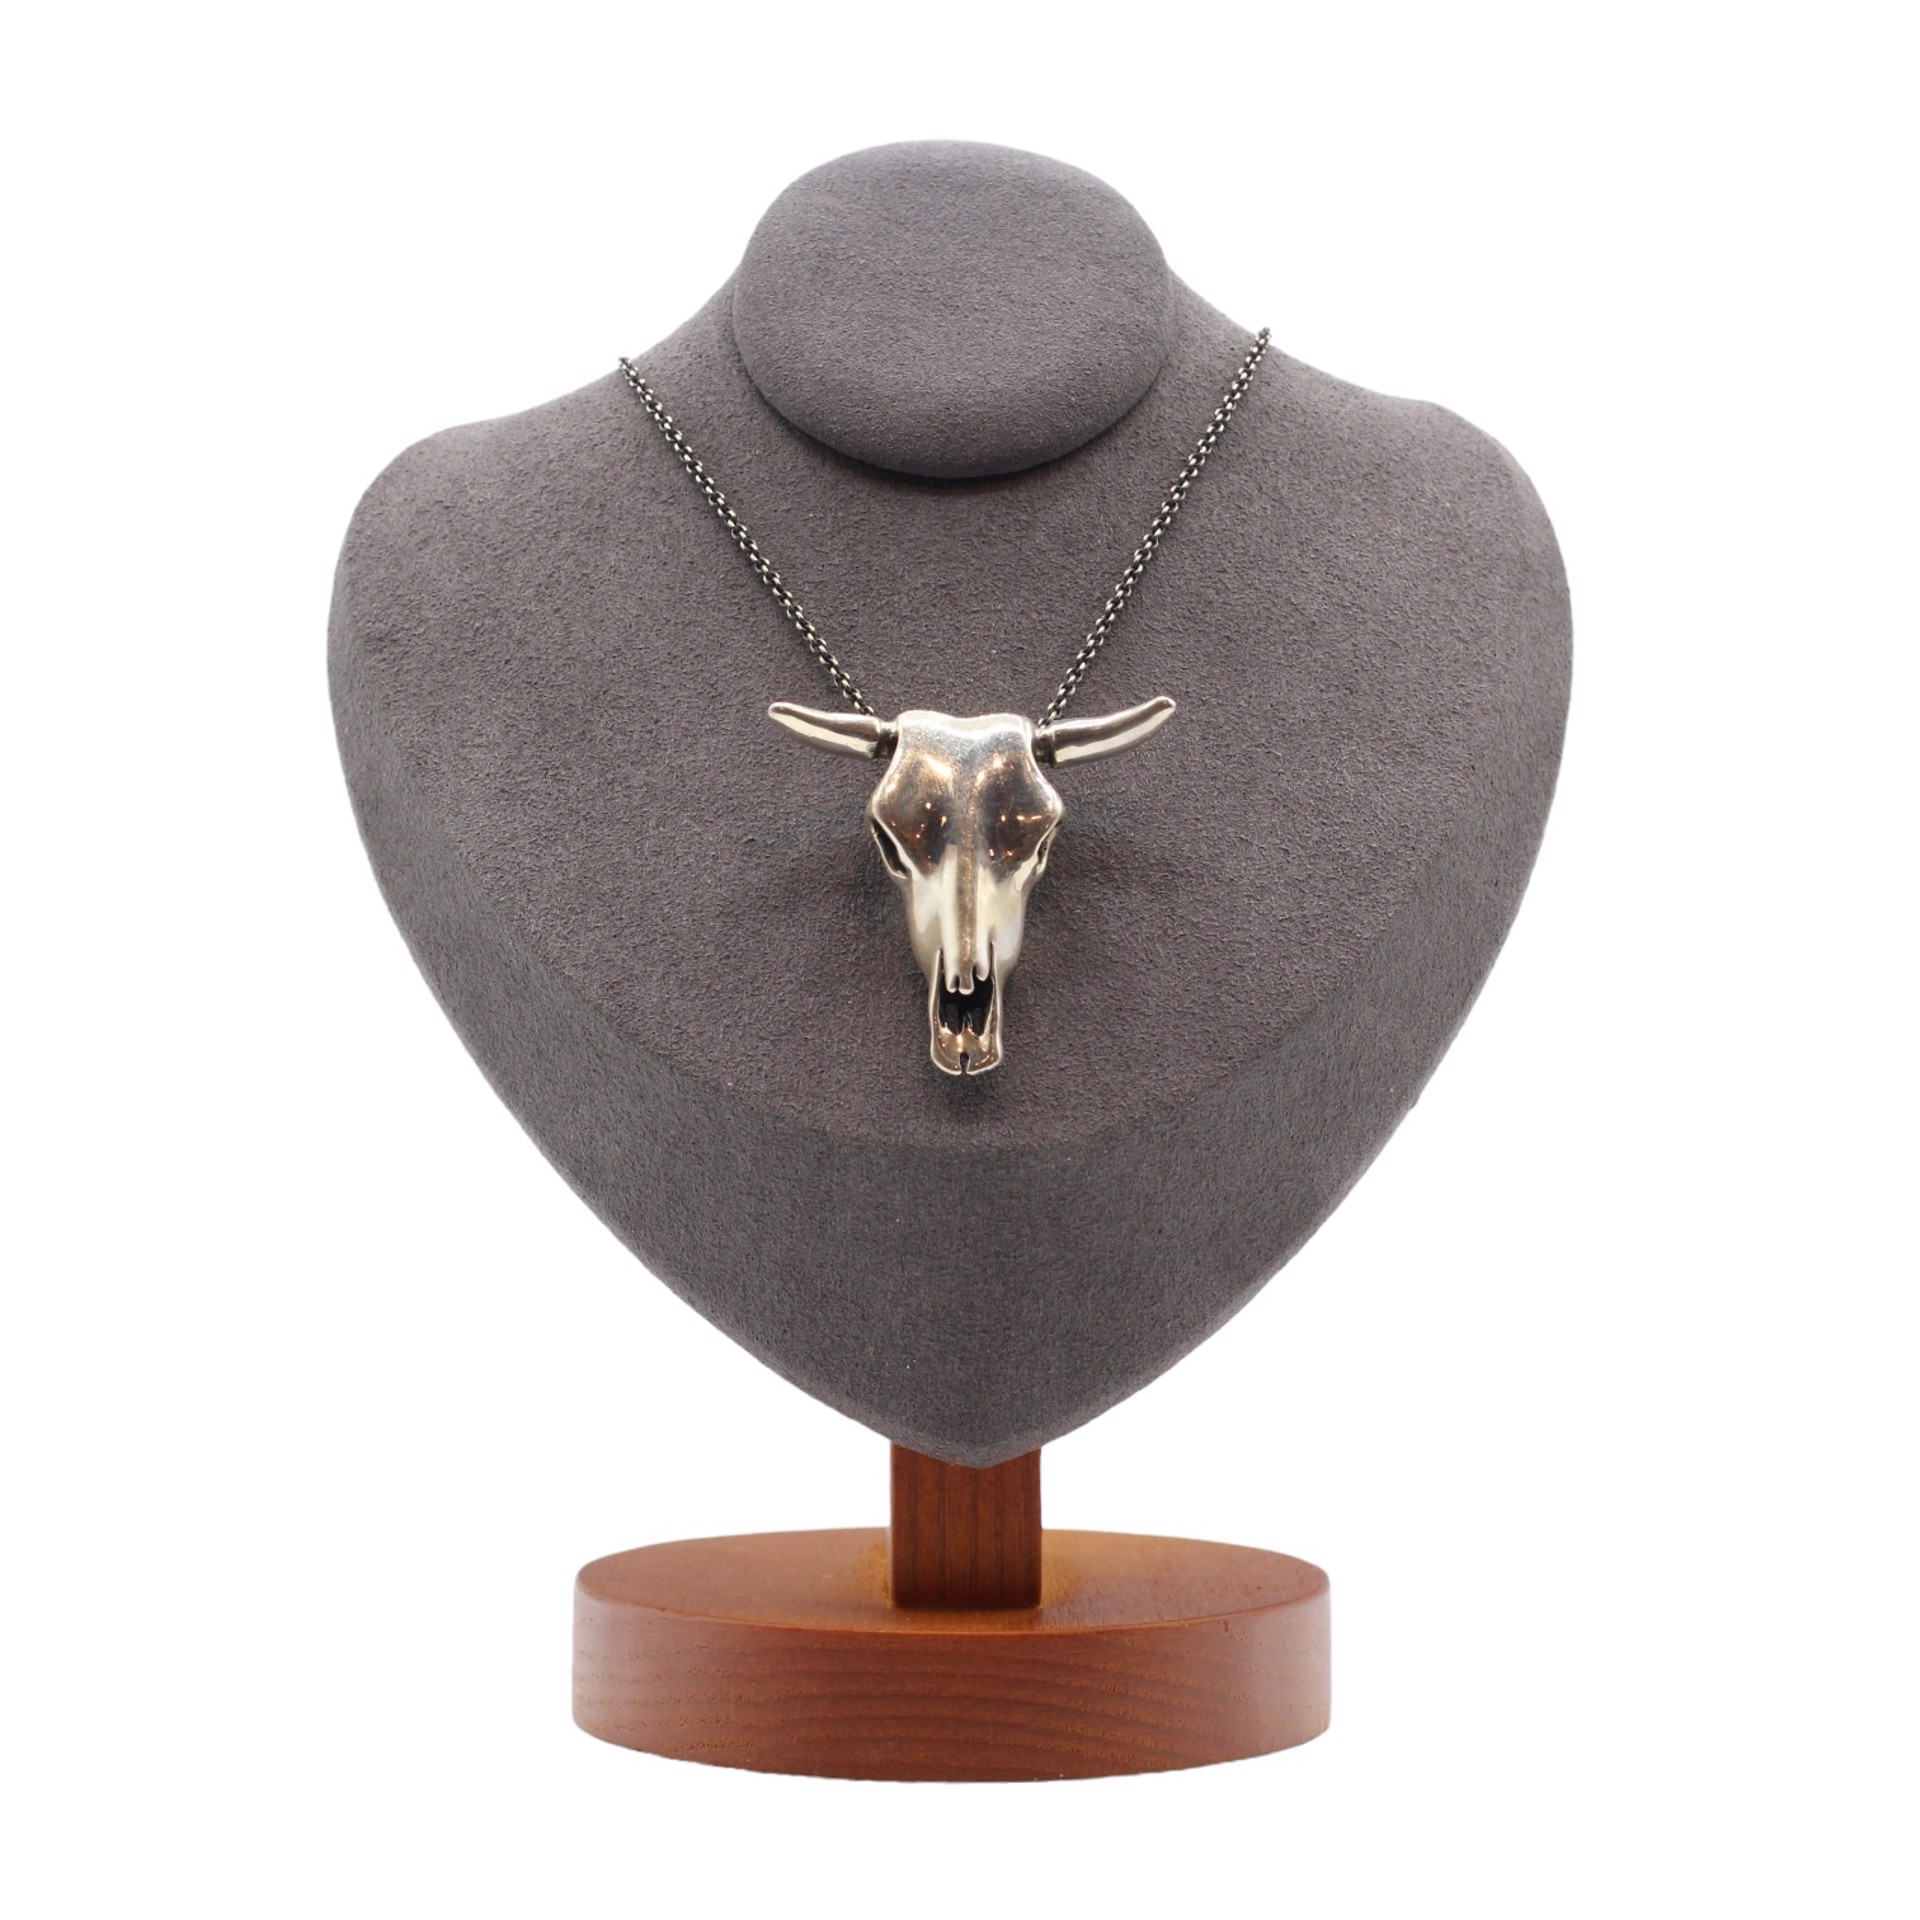 Silver Cow Skull Necklace - High Polish Silver by Louisa Berky